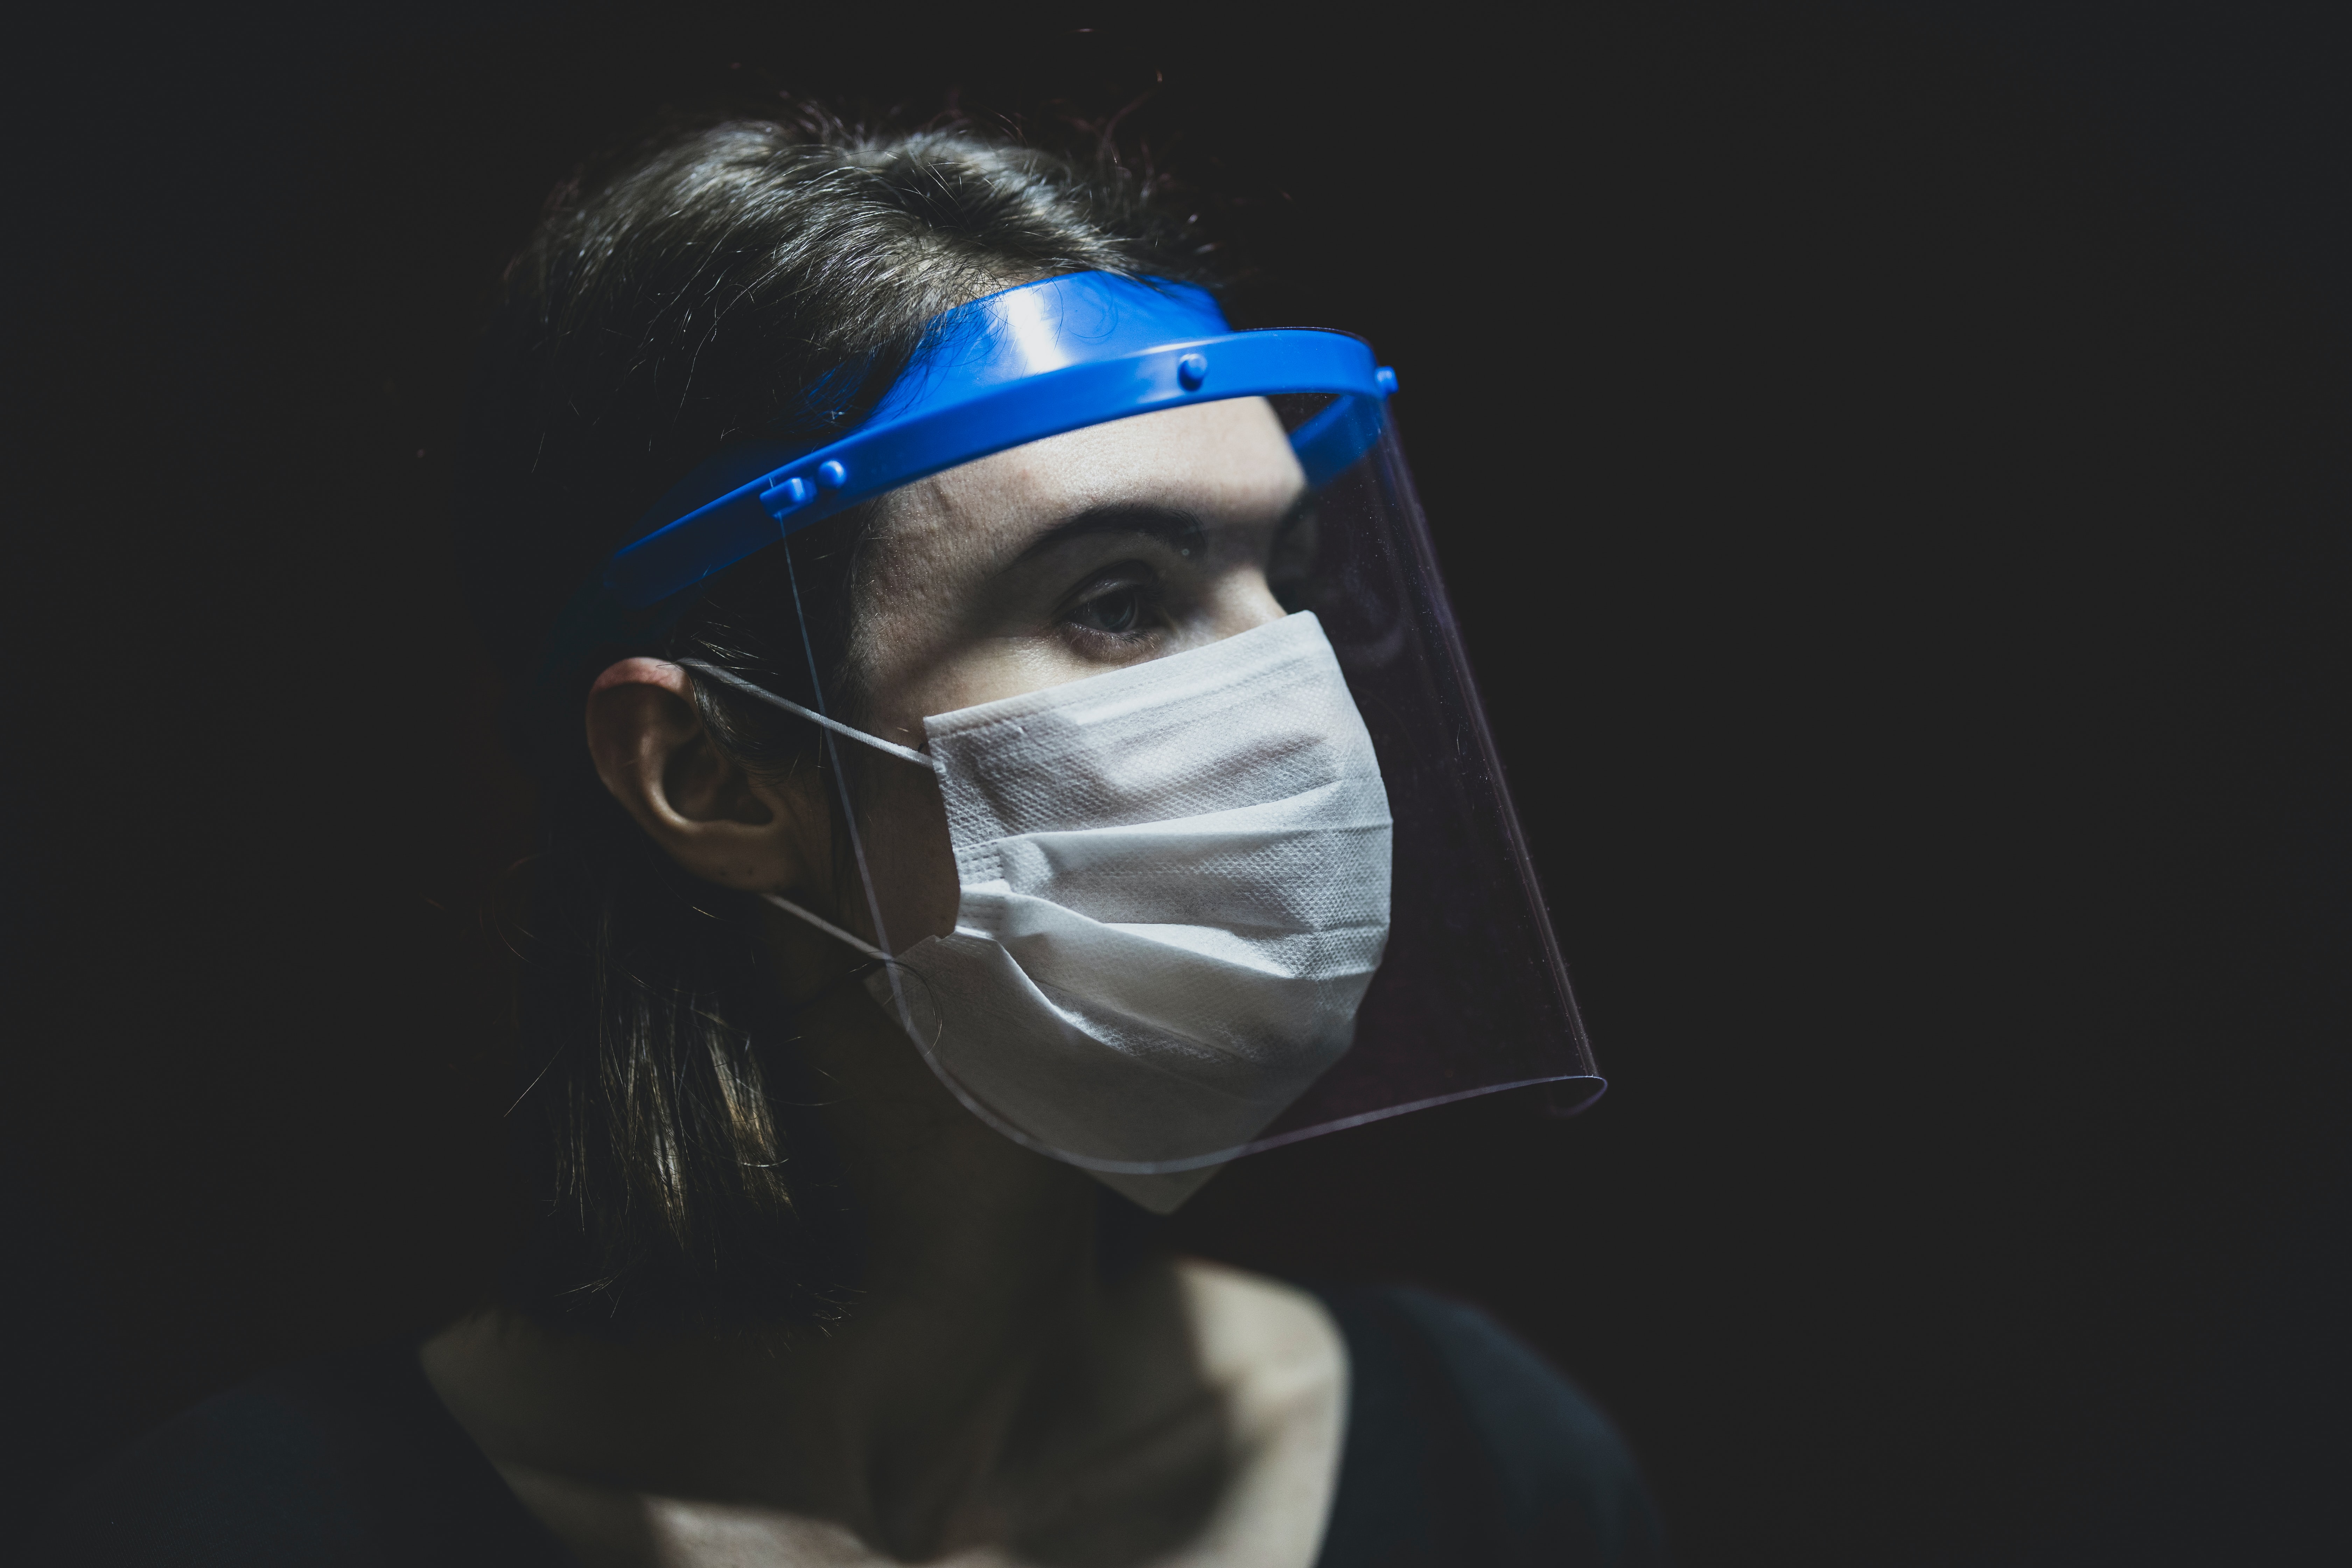 a woman wearing a mask and face shield against a dark background